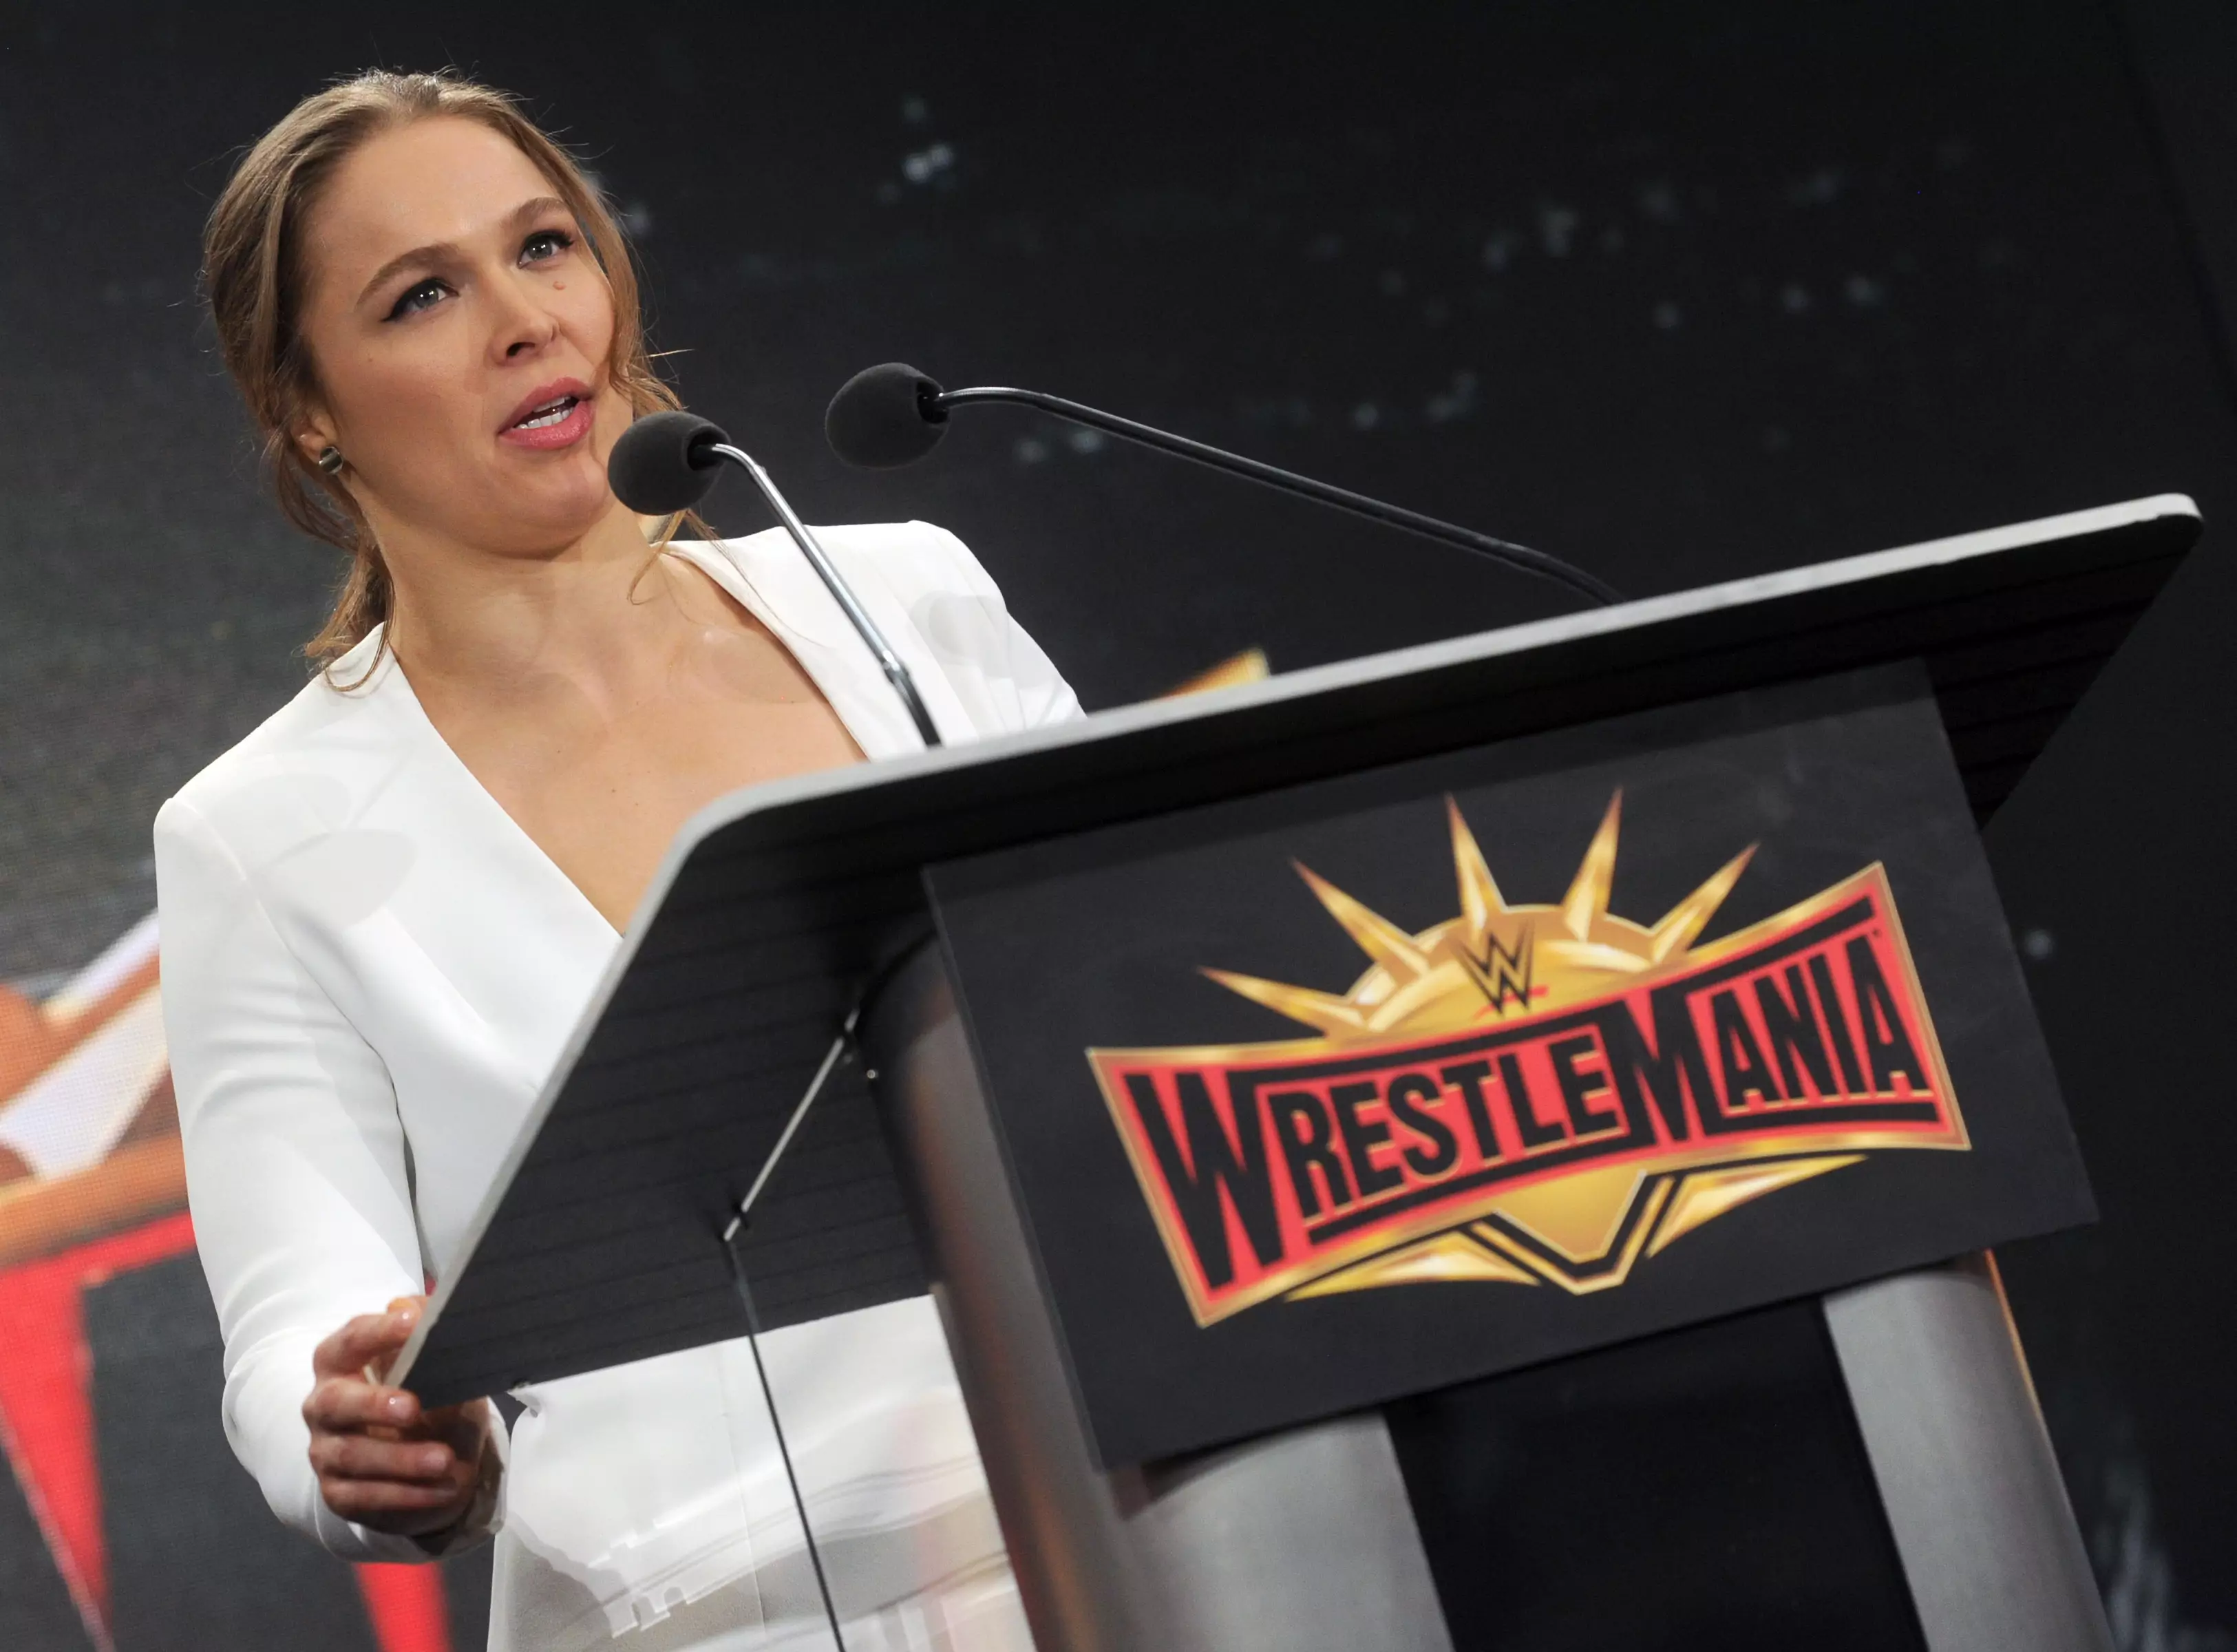 Ronda Rousey became champion in the WWE.